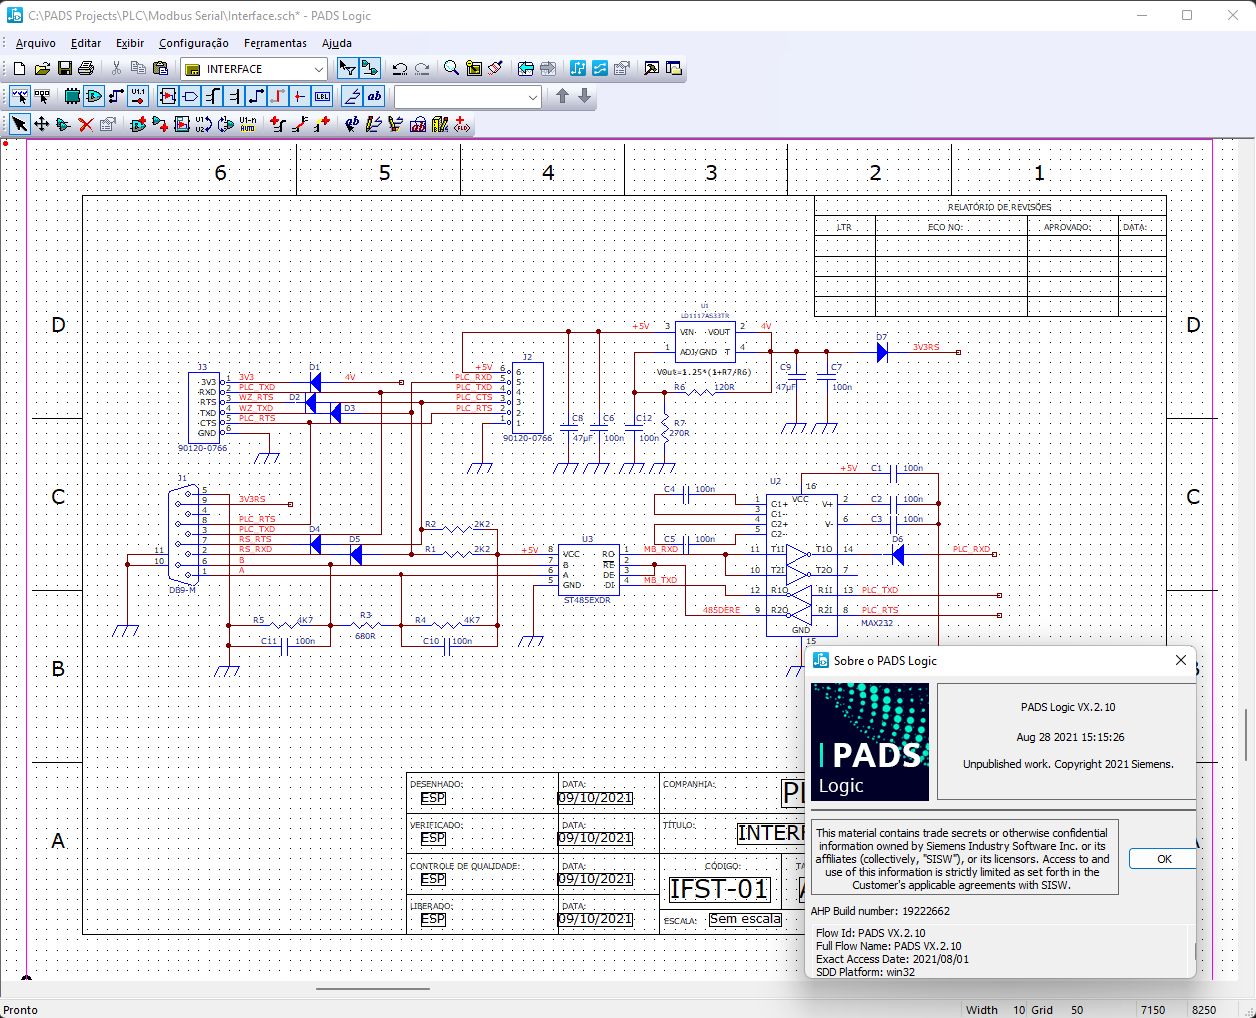 Working with Mentor Graphics PADS VX 2.10 full